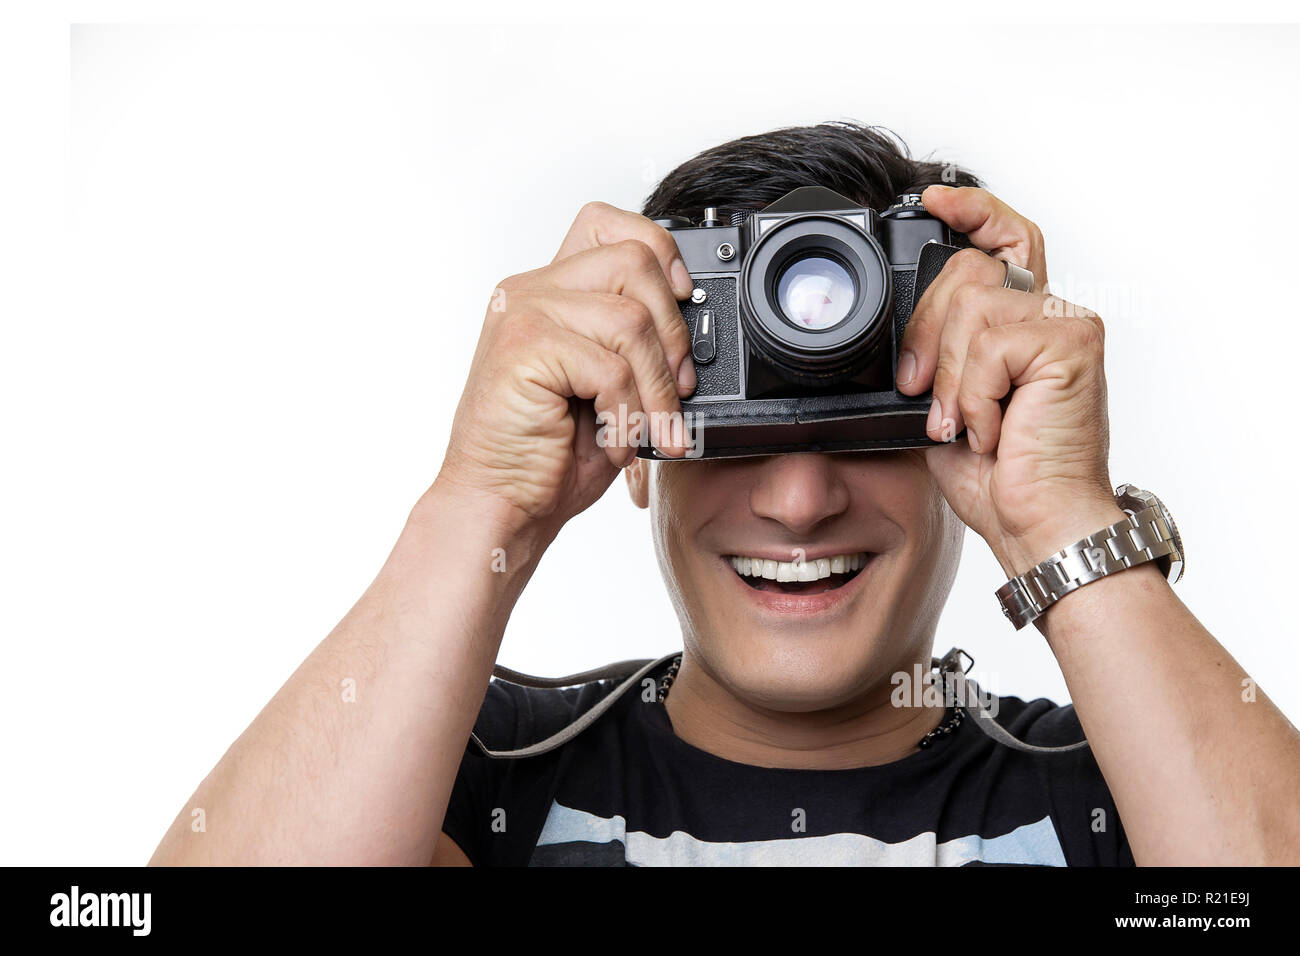 happy young man with camera on a white background Stock Photo